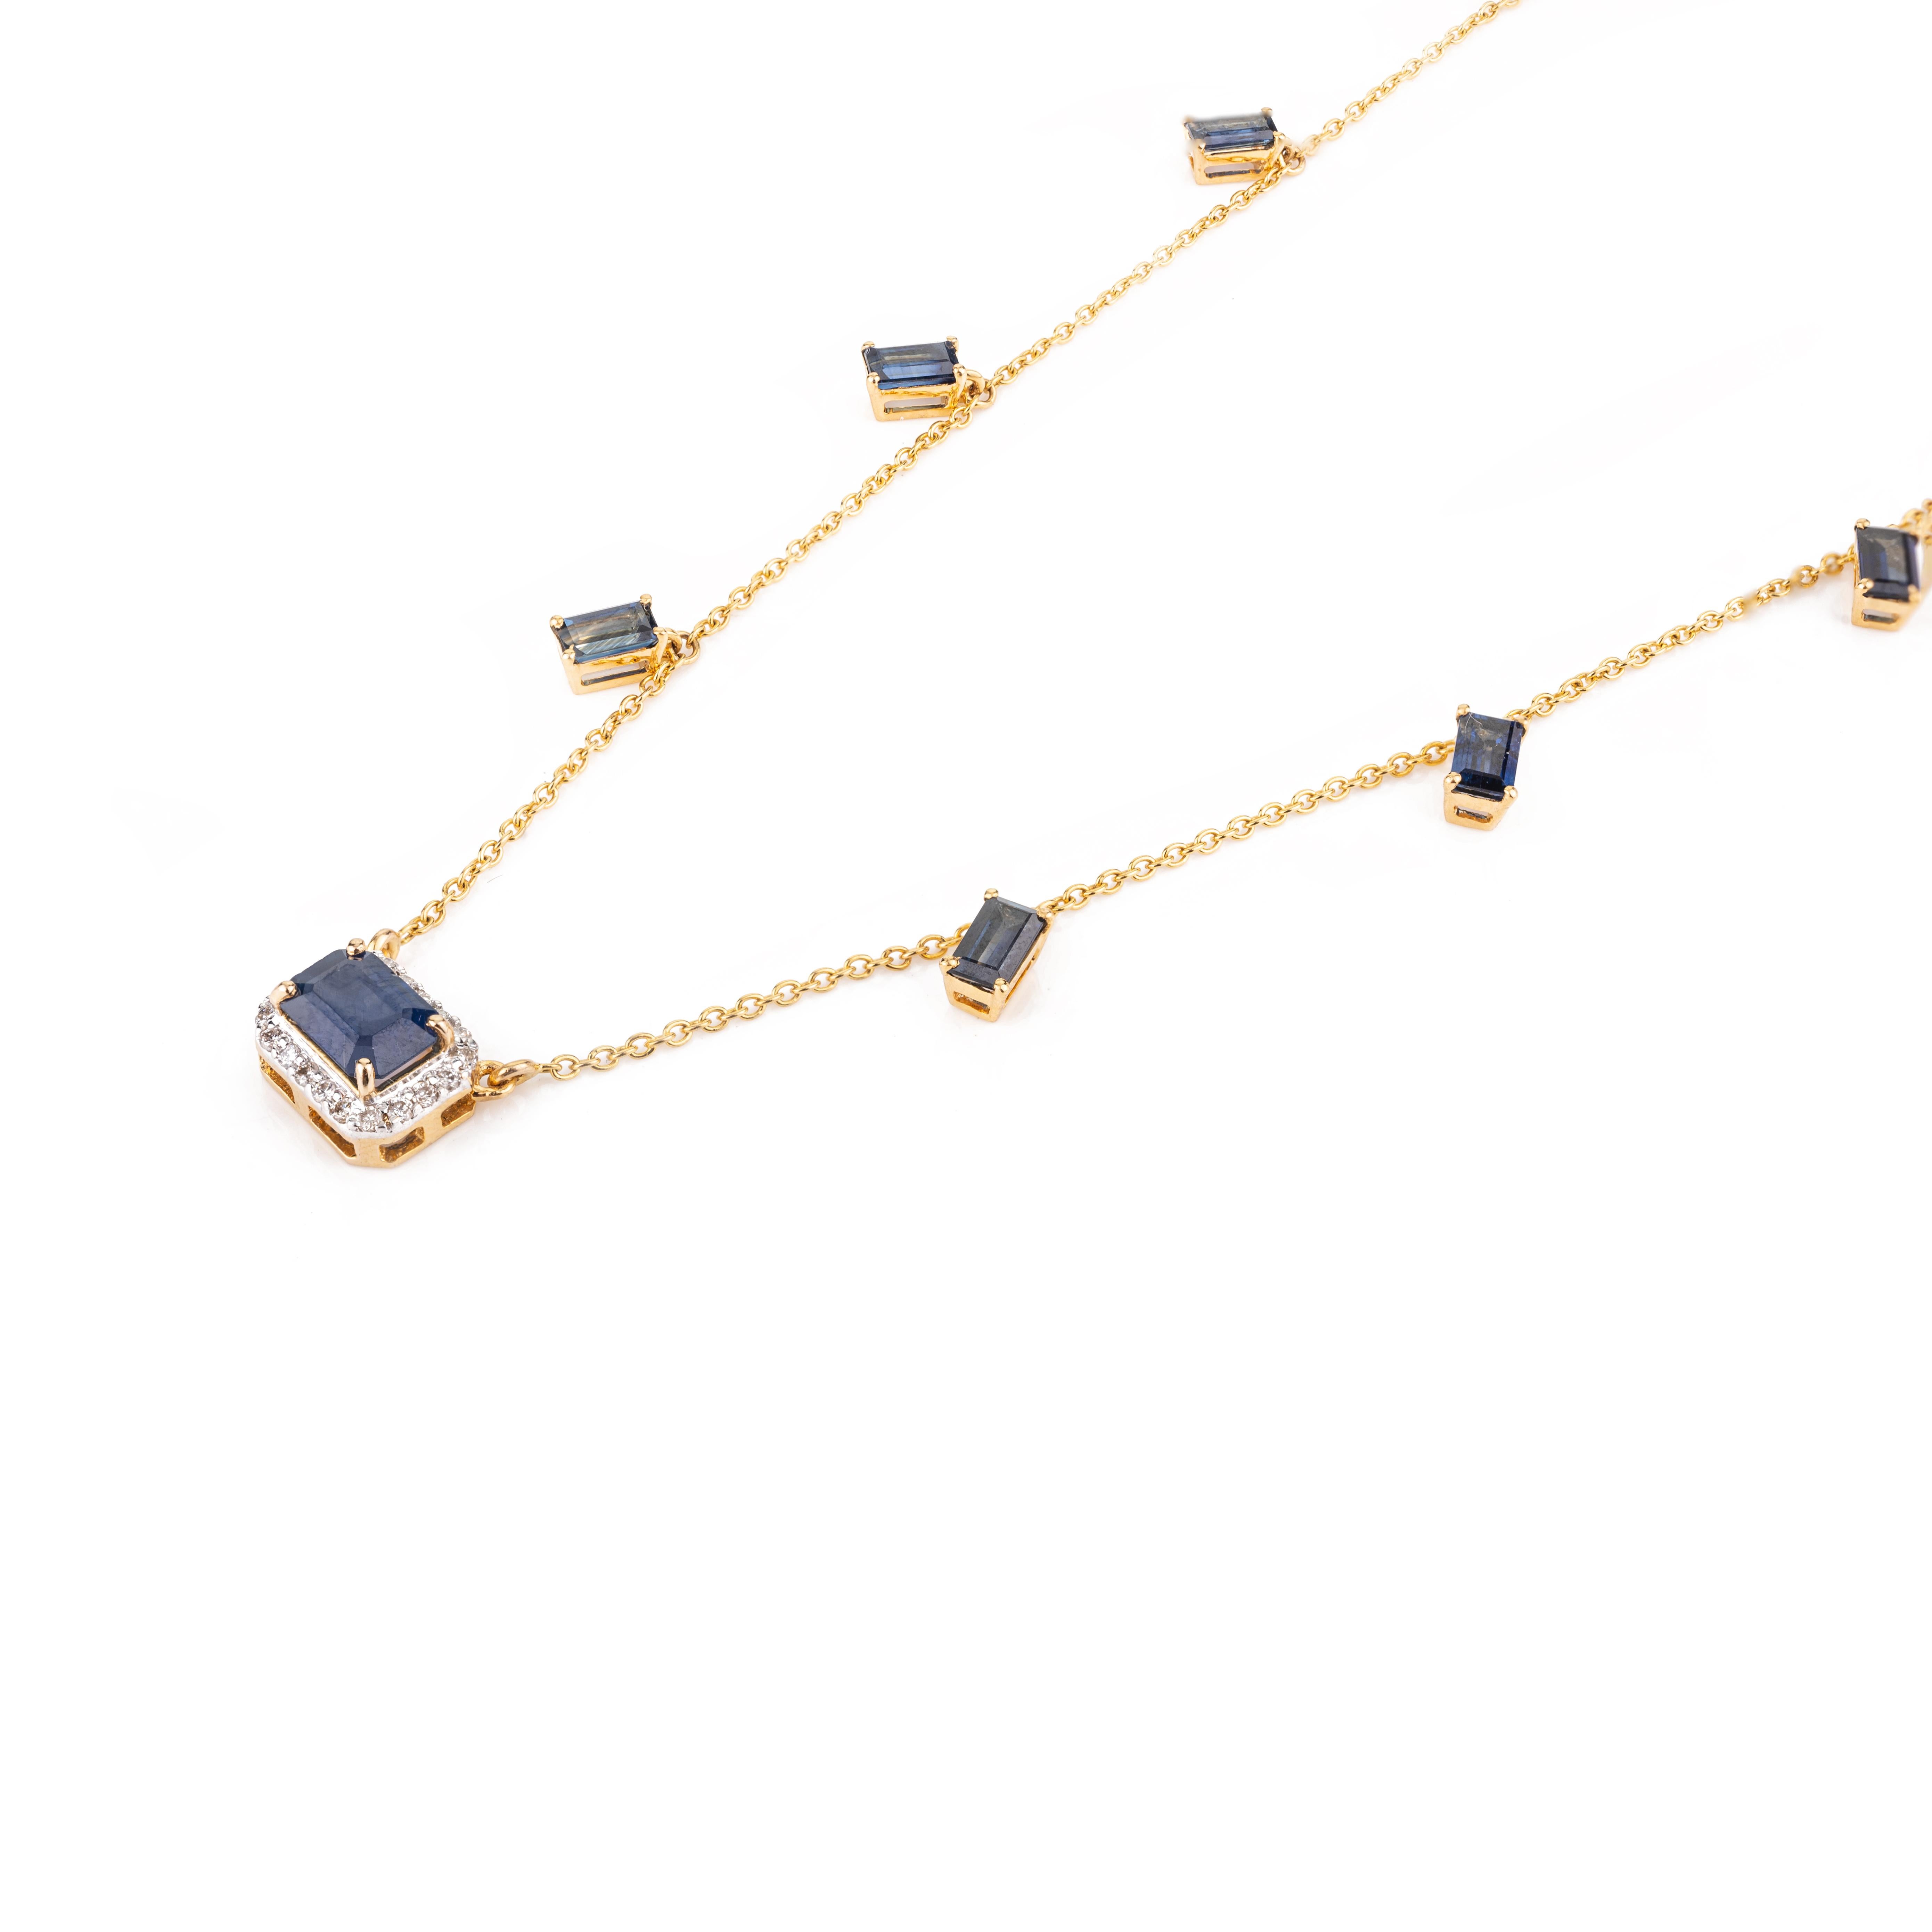 Modern Dangling Blue Sapphire Diamond 14k Yellow Gold Chain Necklace Gift for Her For Sale